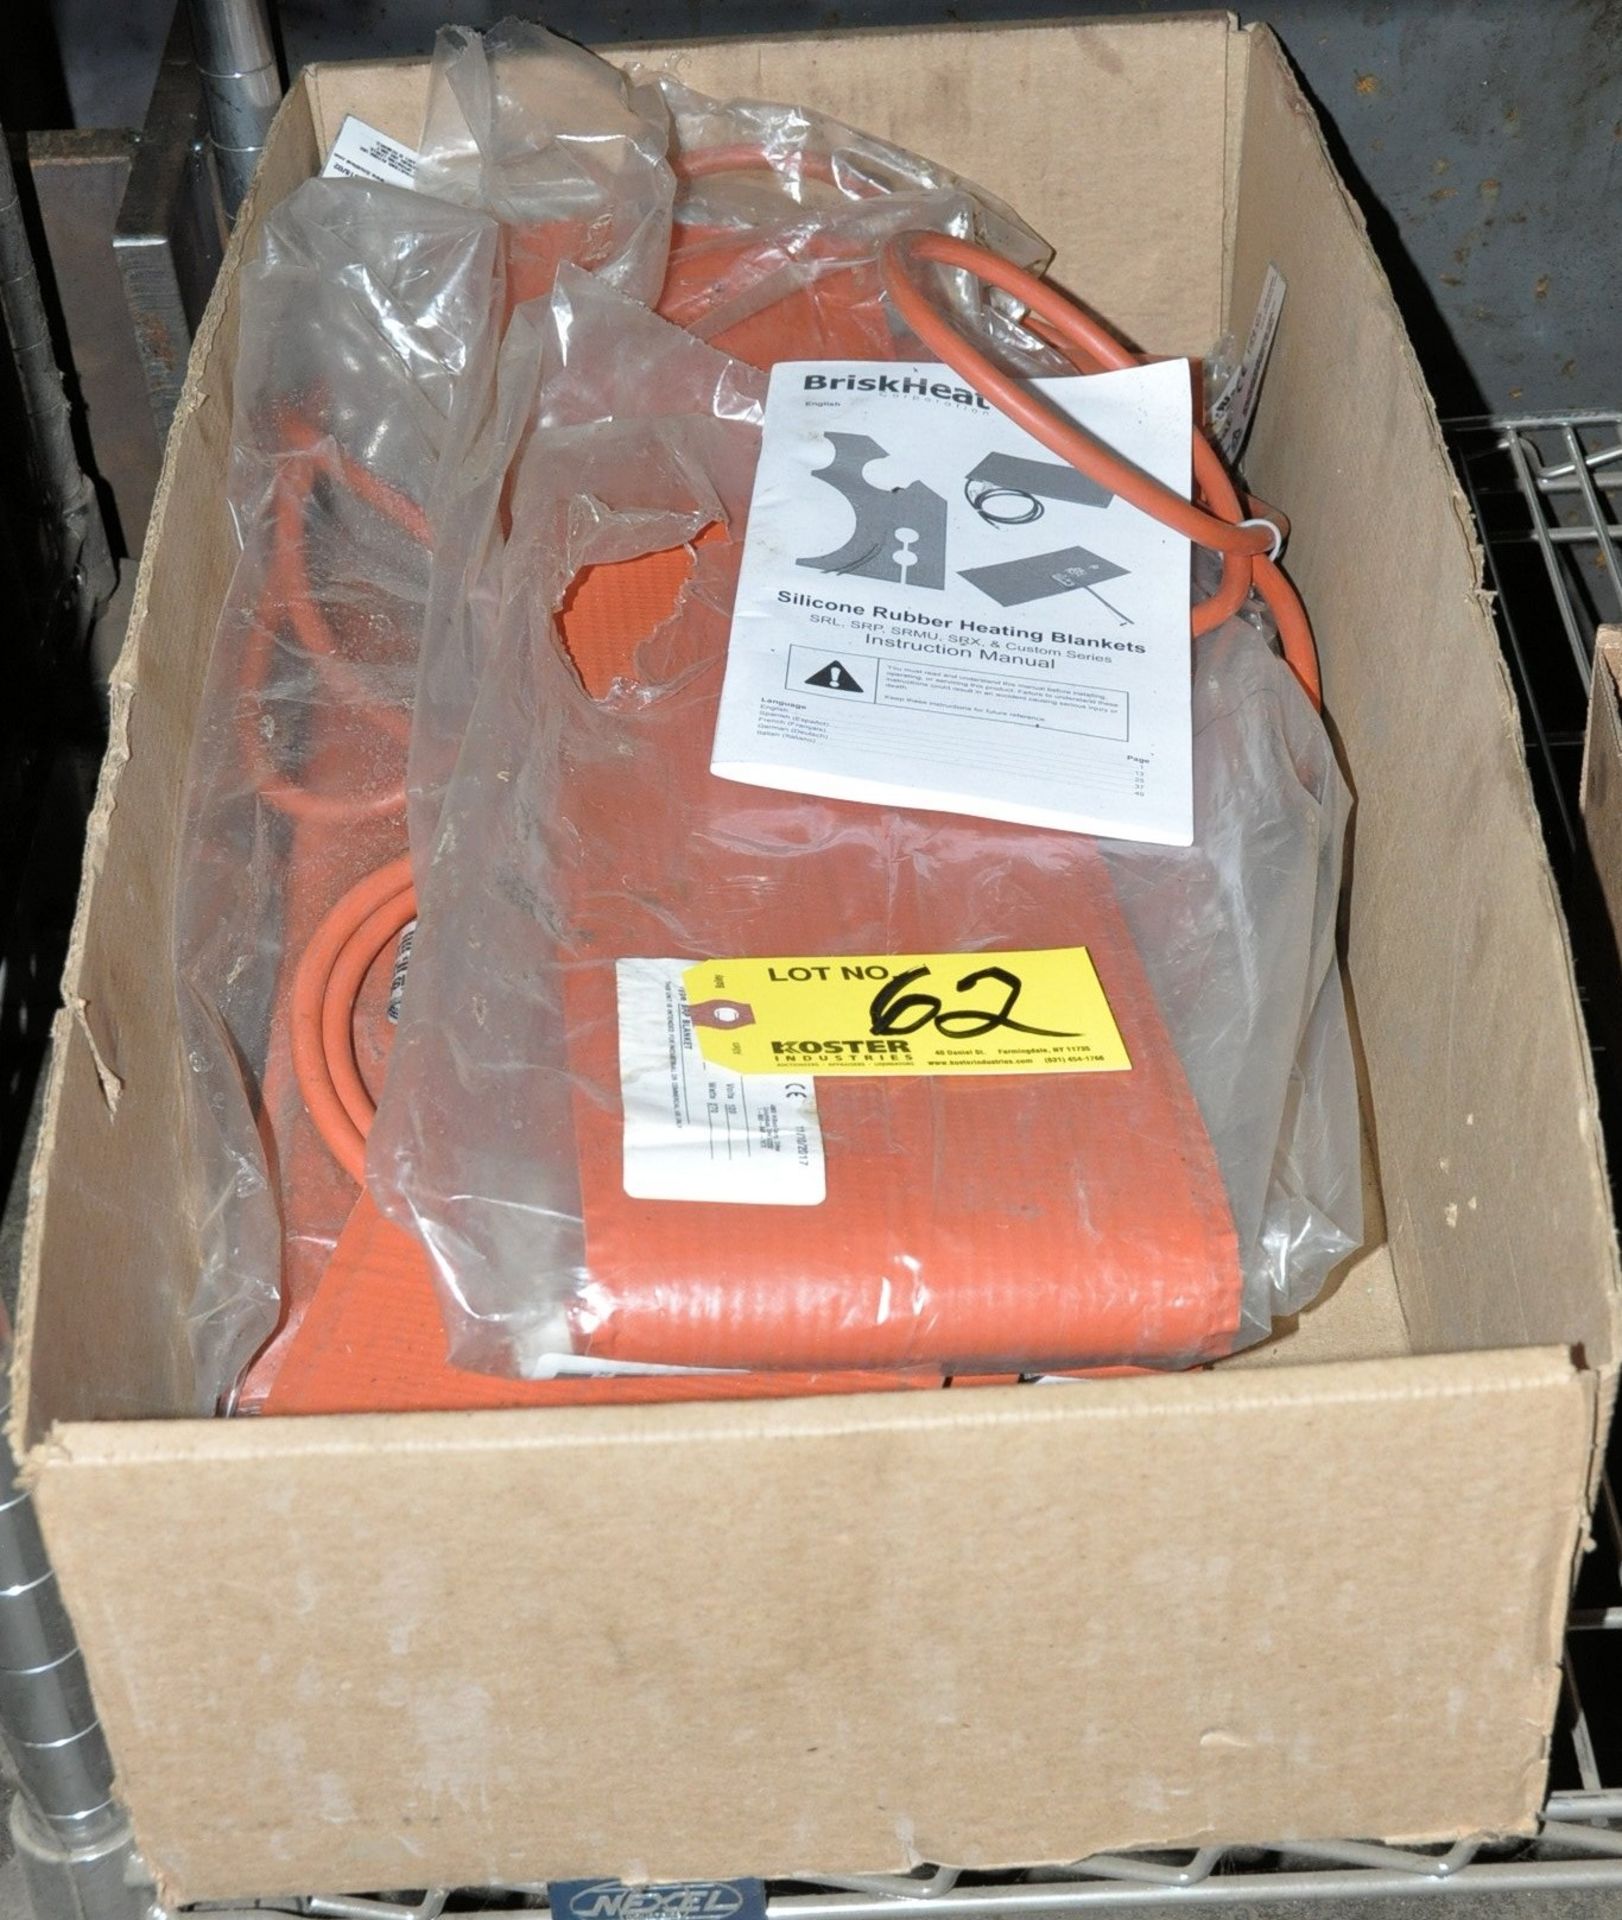 SILICON RUBBER HEATING BLANKET IN (1) BOX